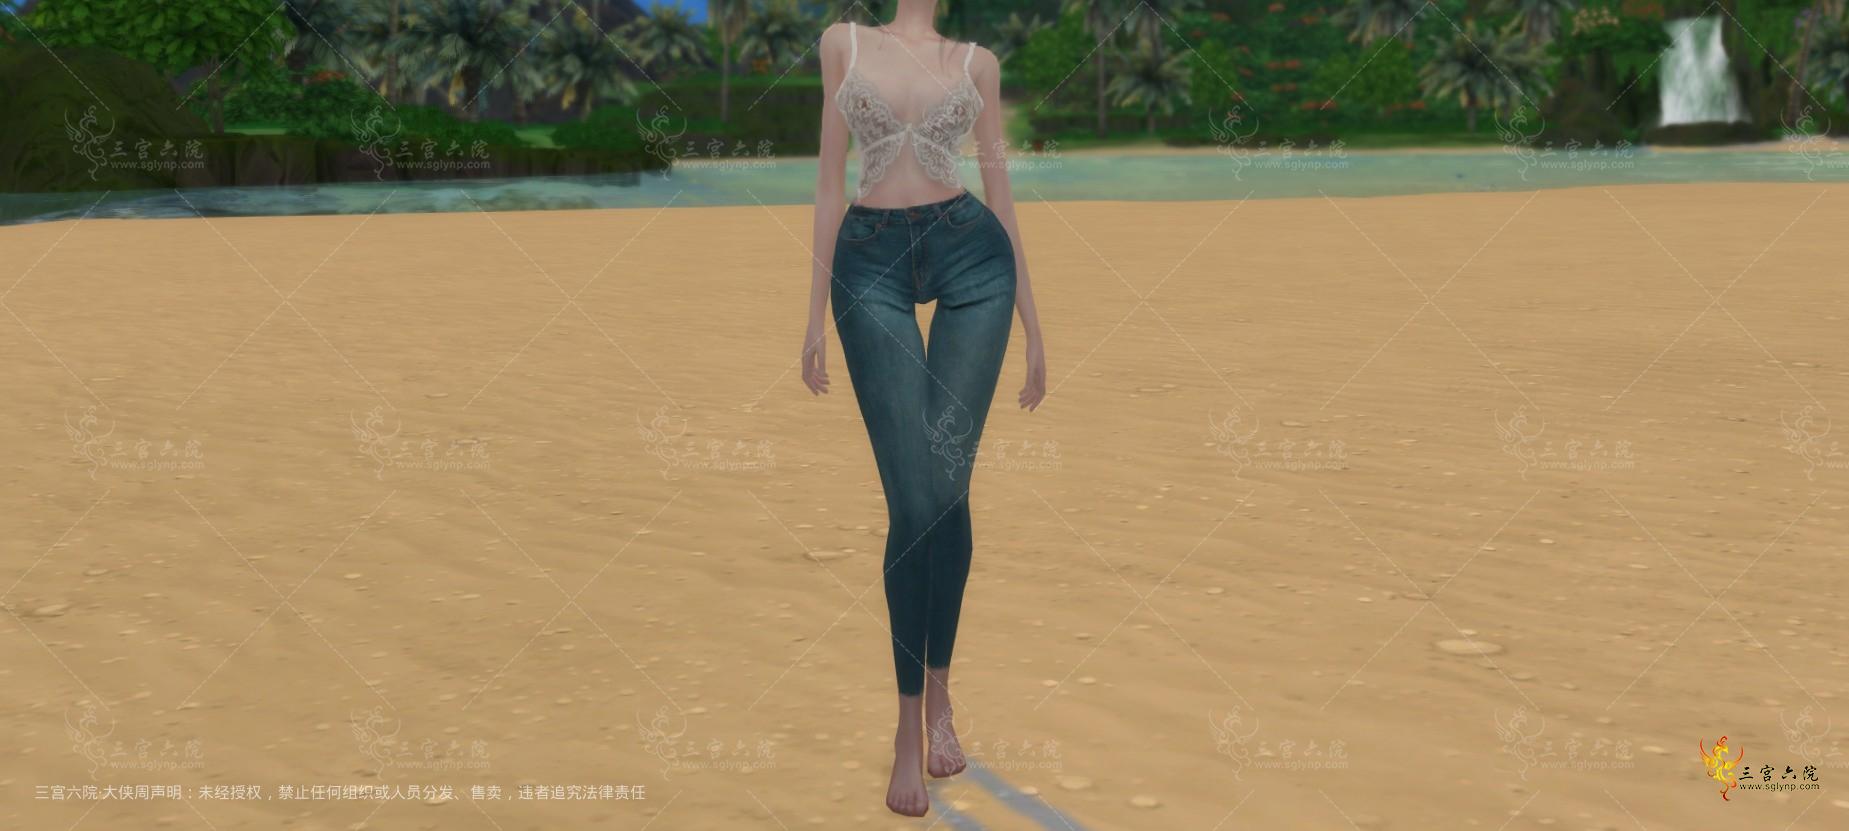 The Sims 4 2021_12_27 0_52_35 (2).png